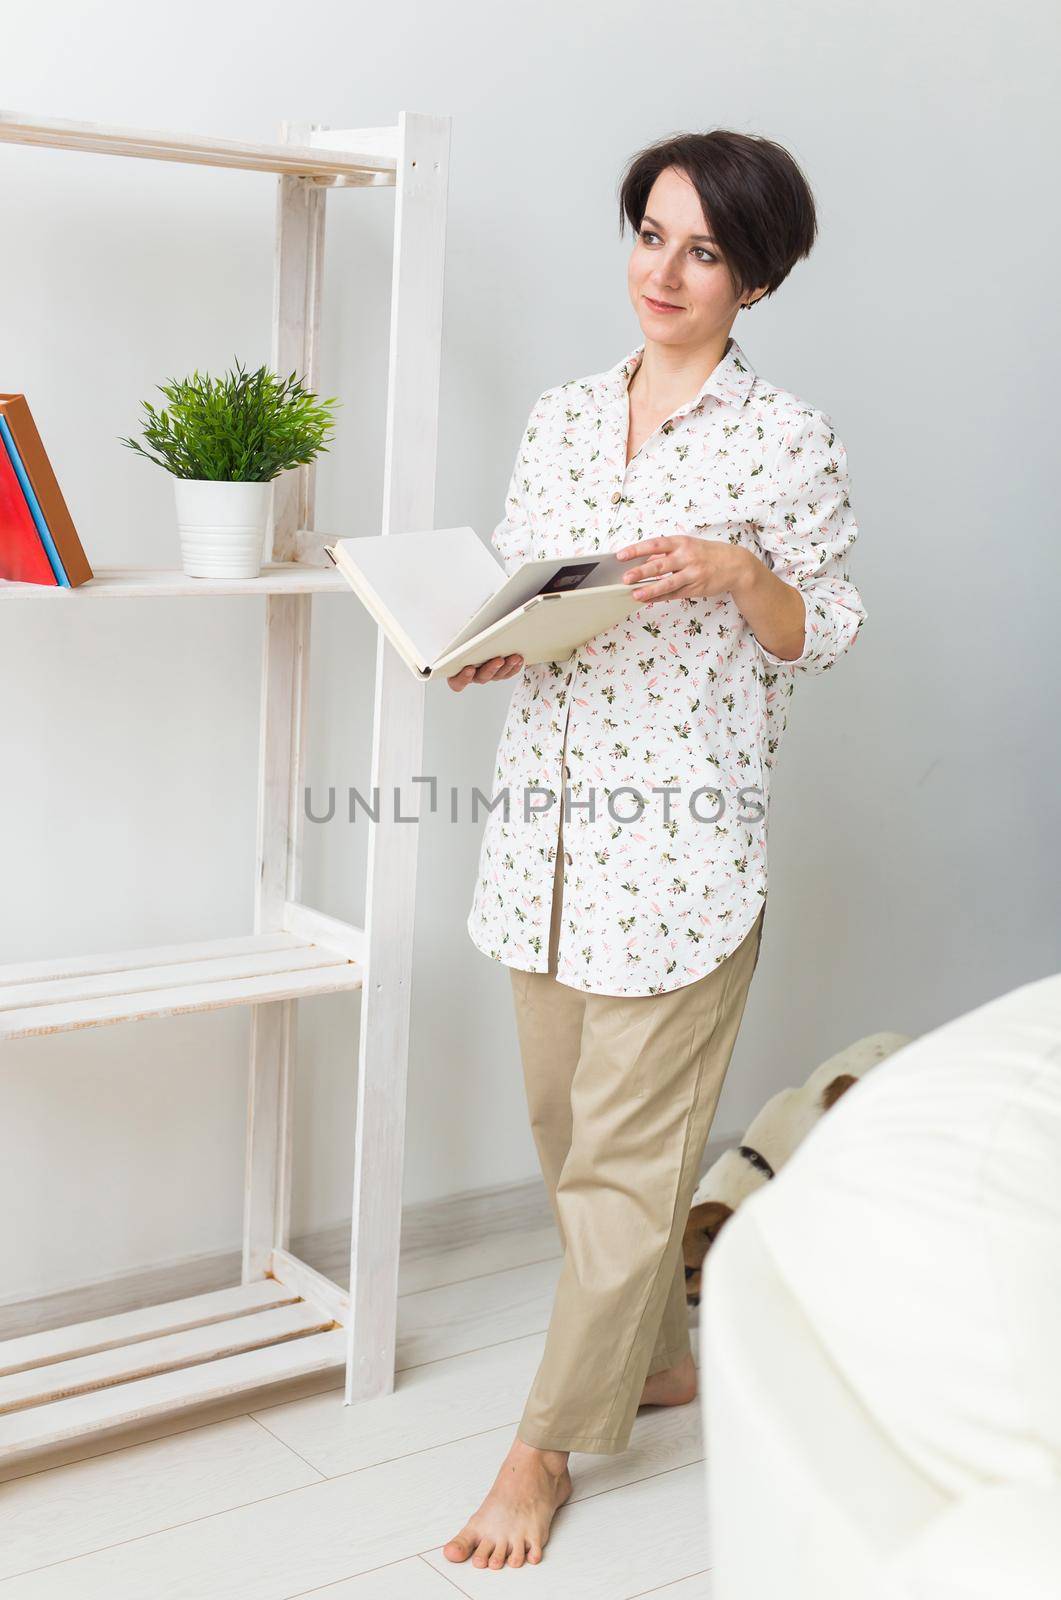 Beautiful young woman standing by the window reading a book